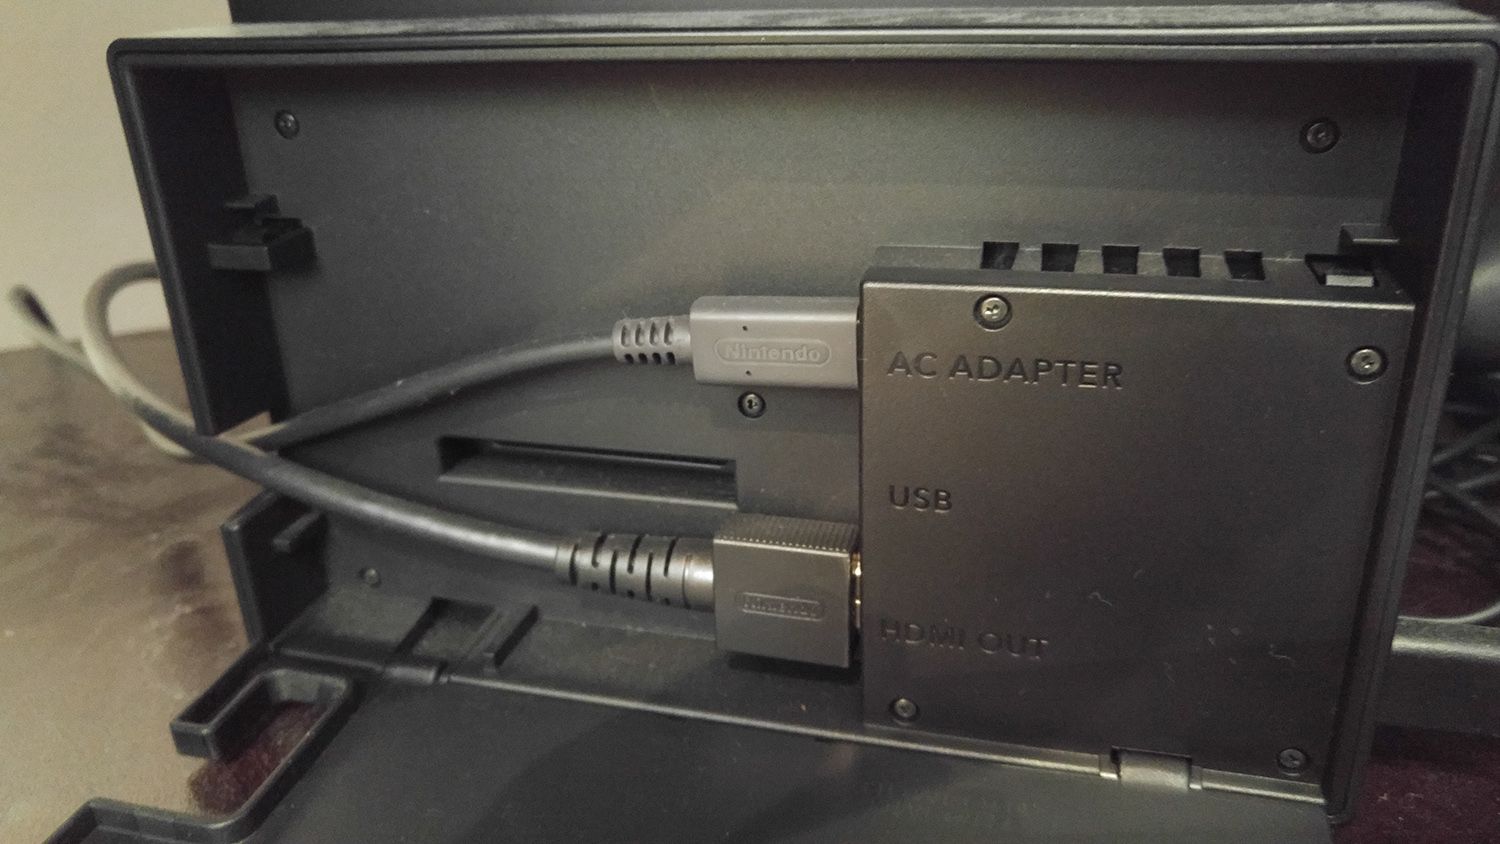 The AC Adapter port on the back of a Nintendo Switch dock.